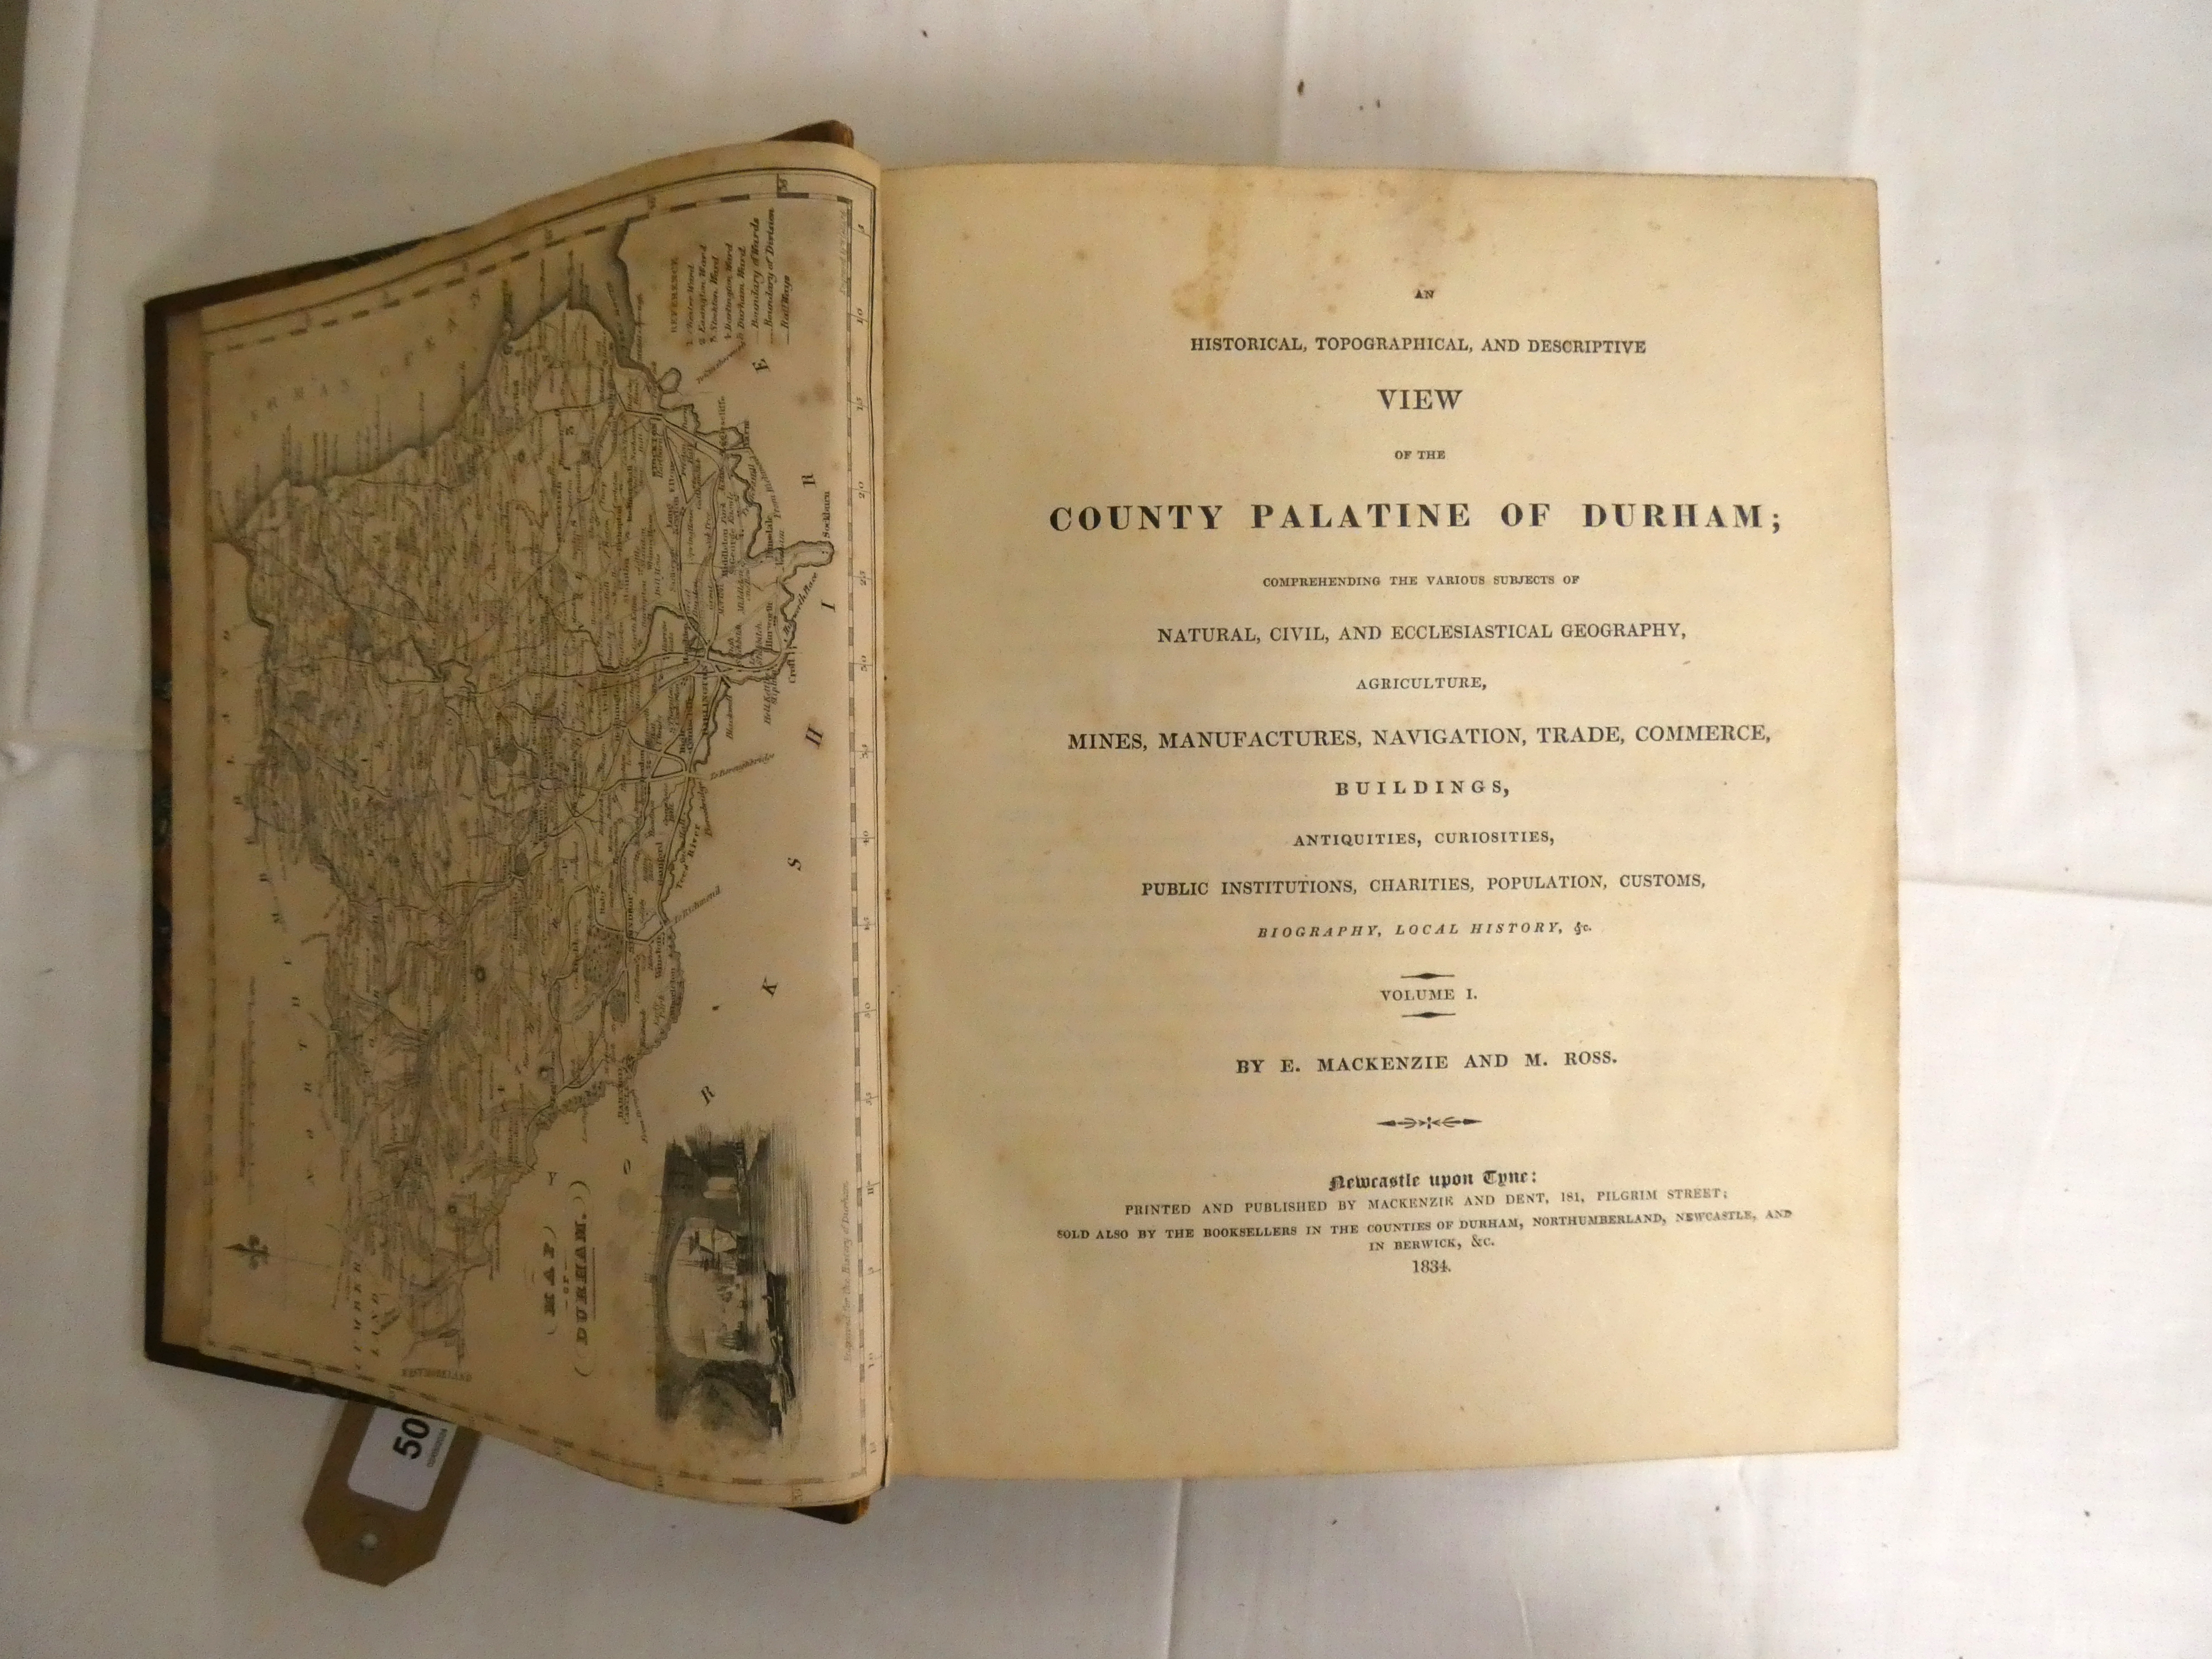 MACKENZIE E. & ROSS M.  An Historical, Topographical & Descriptive View of the County Palatine of